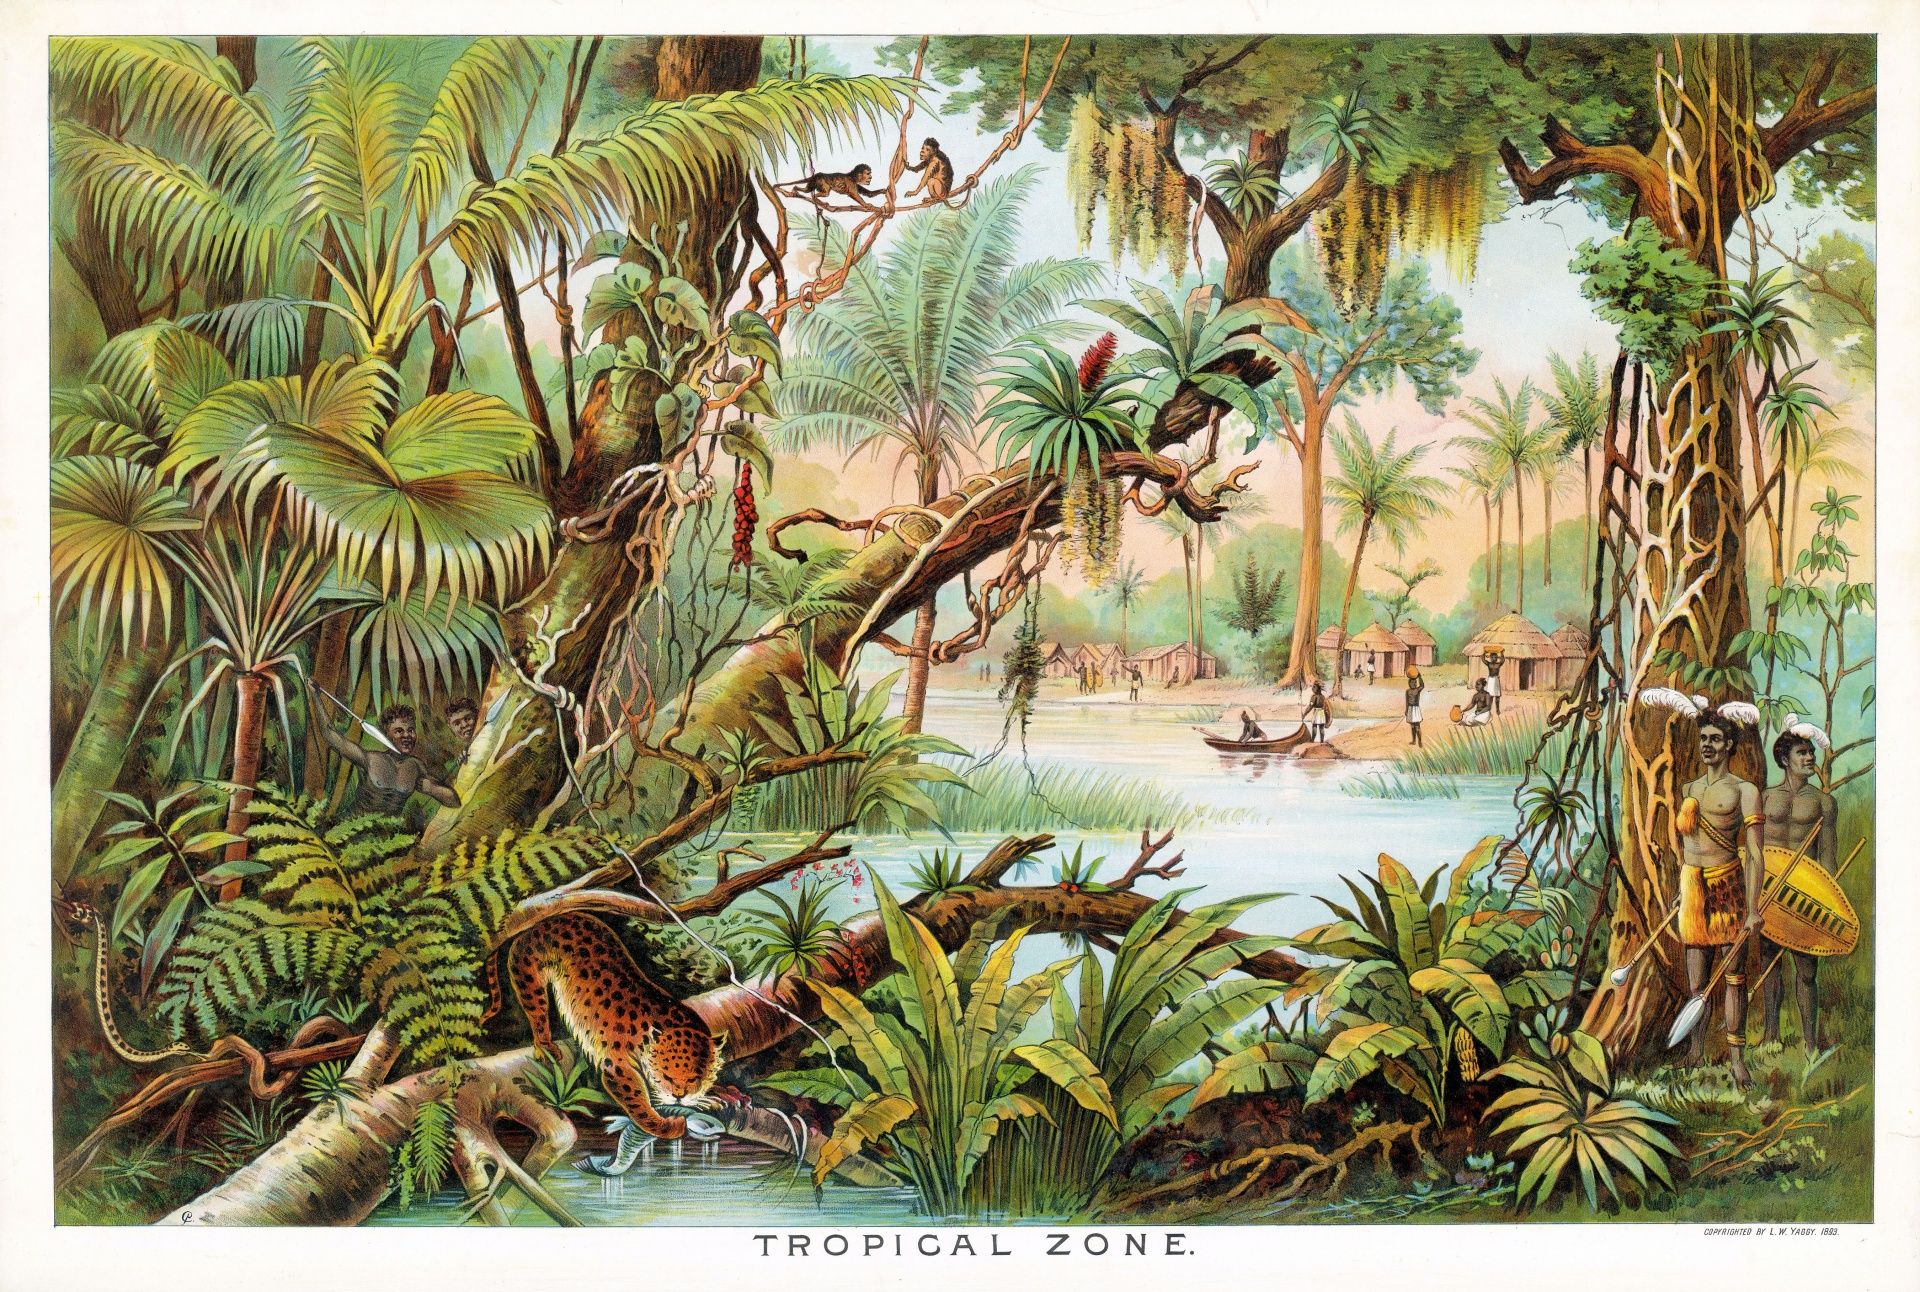 Vintage art illustration tropical rainforest landscape animals hand drawn drawing painting old antique public domain natural history poster print